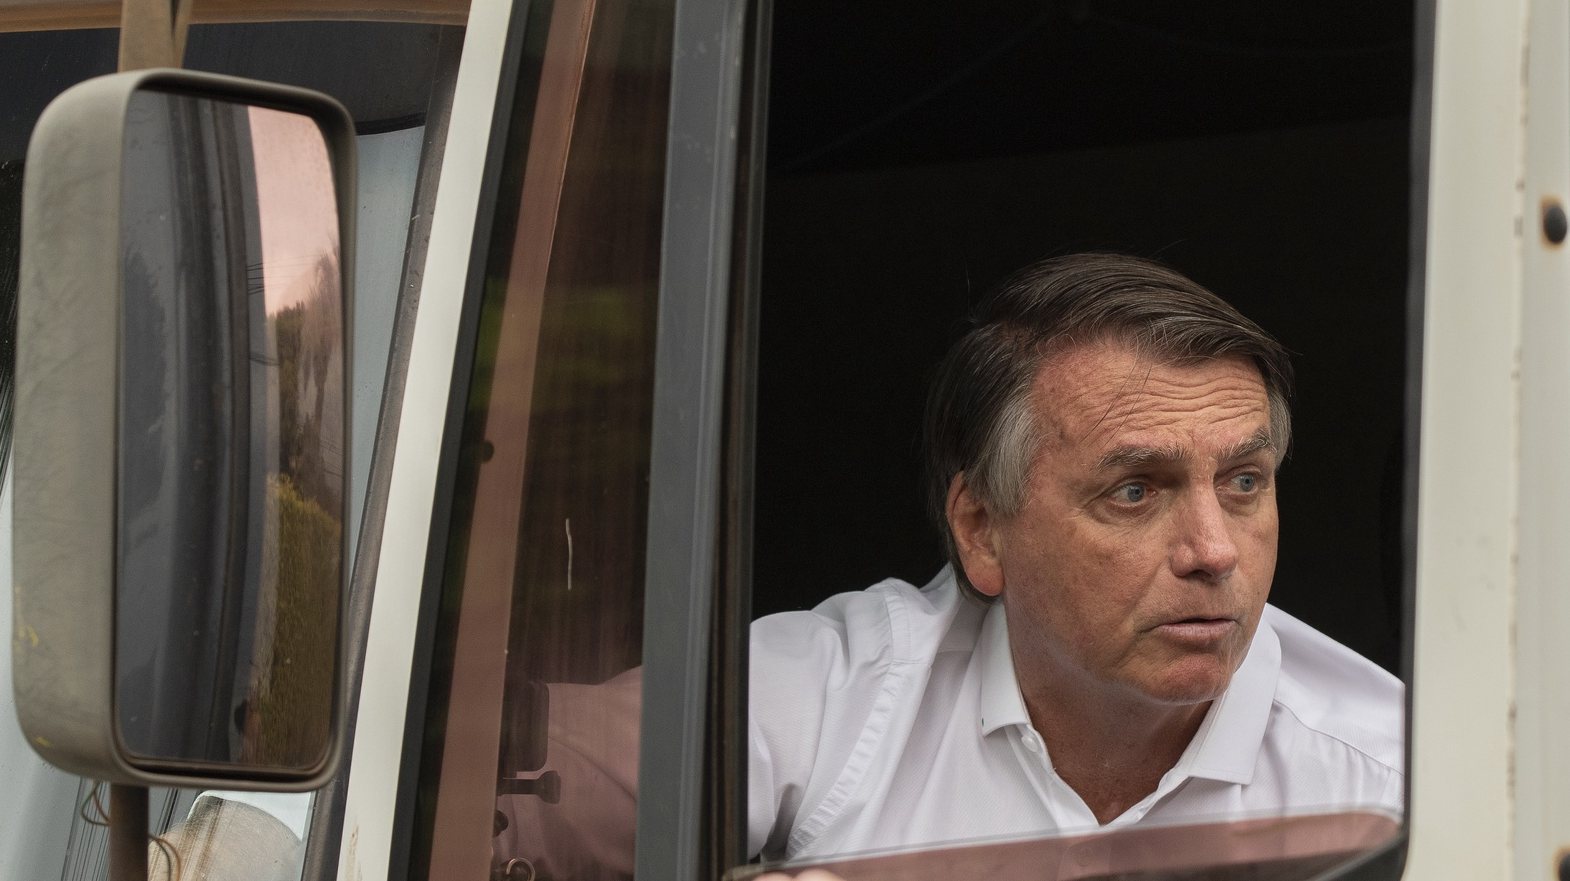 epa10229430 Jair Bolsonaro, president of Brazil and candidate for re-election, is seen in a truck where he will record an electoral propaganda video in Brasilia, Brazil, 07 October 2022. Bolsonaro will face Former Brazilian President Luiz Inacio Lula da Silva (PT) in the second round of the presidential elections on 30 October.  EPA/Joedson Alves